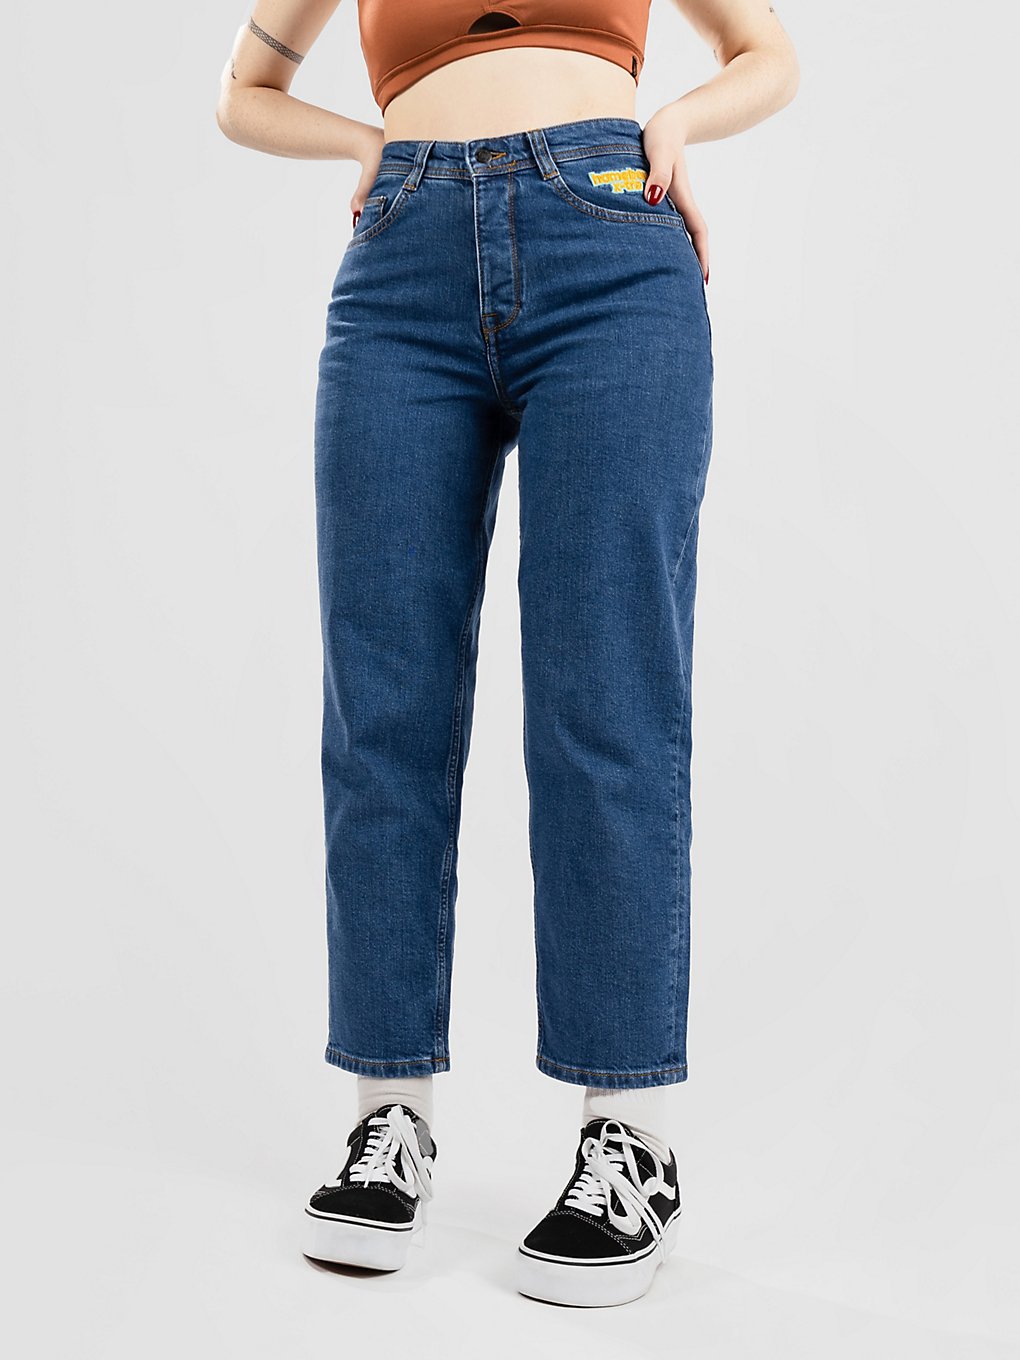 Homeboy X-Tra BAGGY Jeans blauw